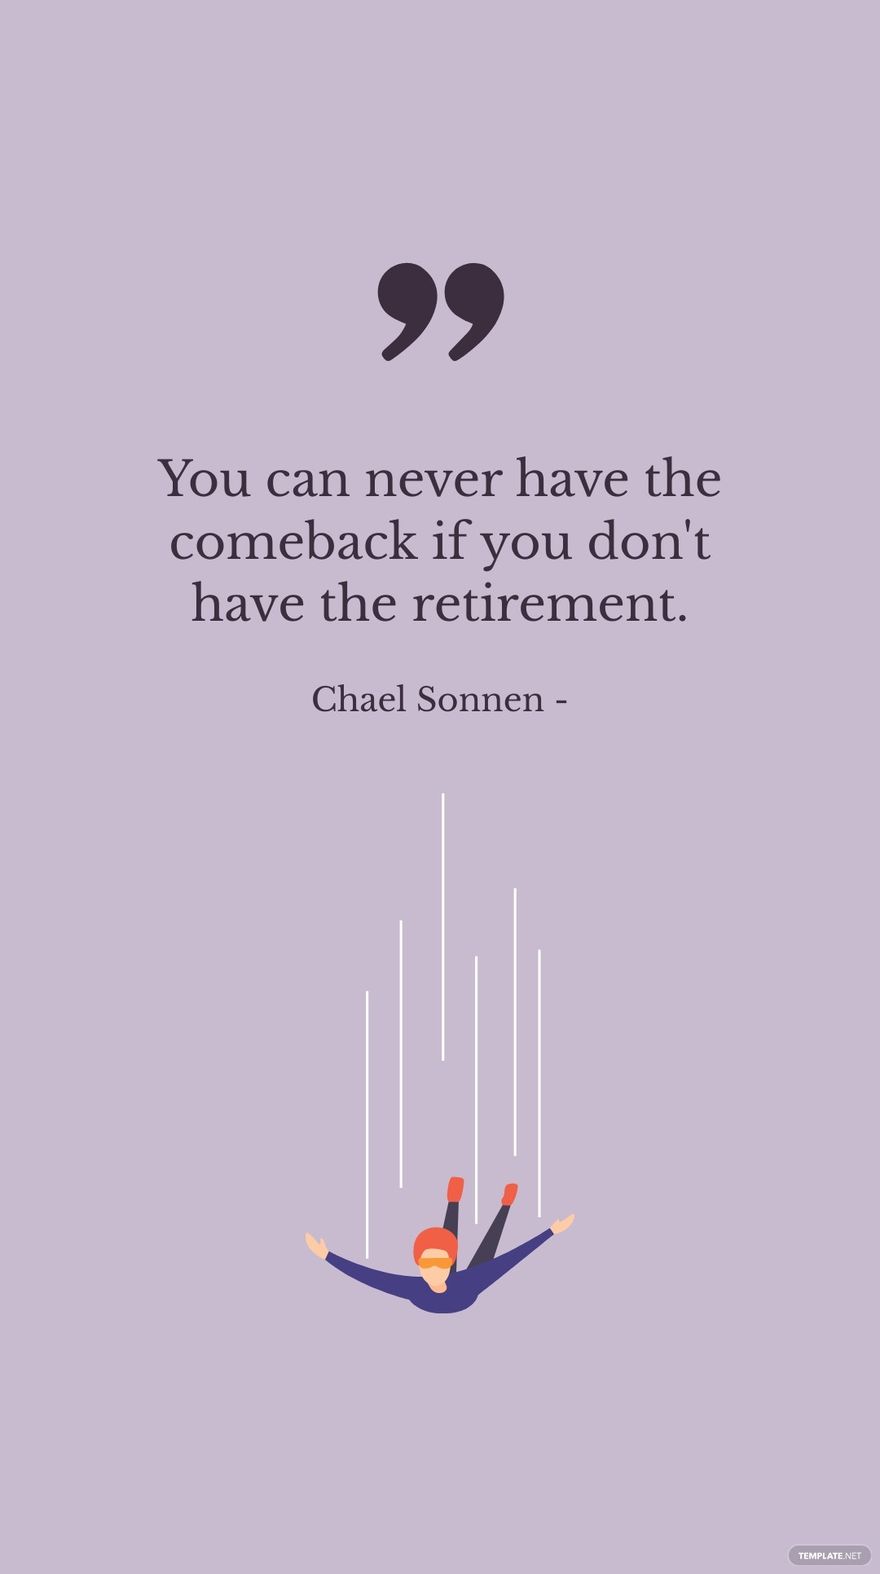 Free Chael Sonnen - You can never have the comeback if you don't have the retirement.